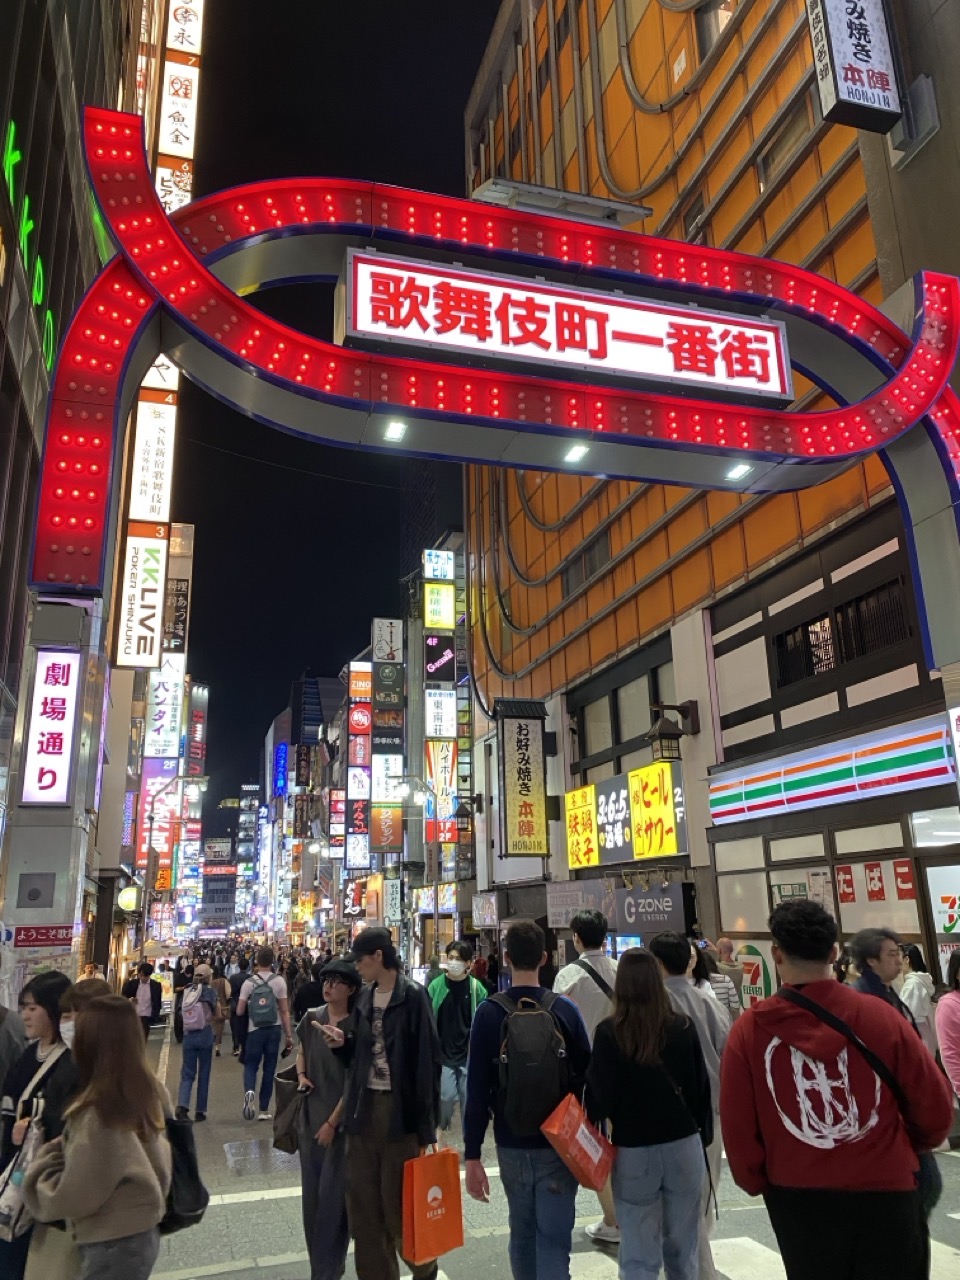 The neon lit gate that forms the entrance to Kabukicho